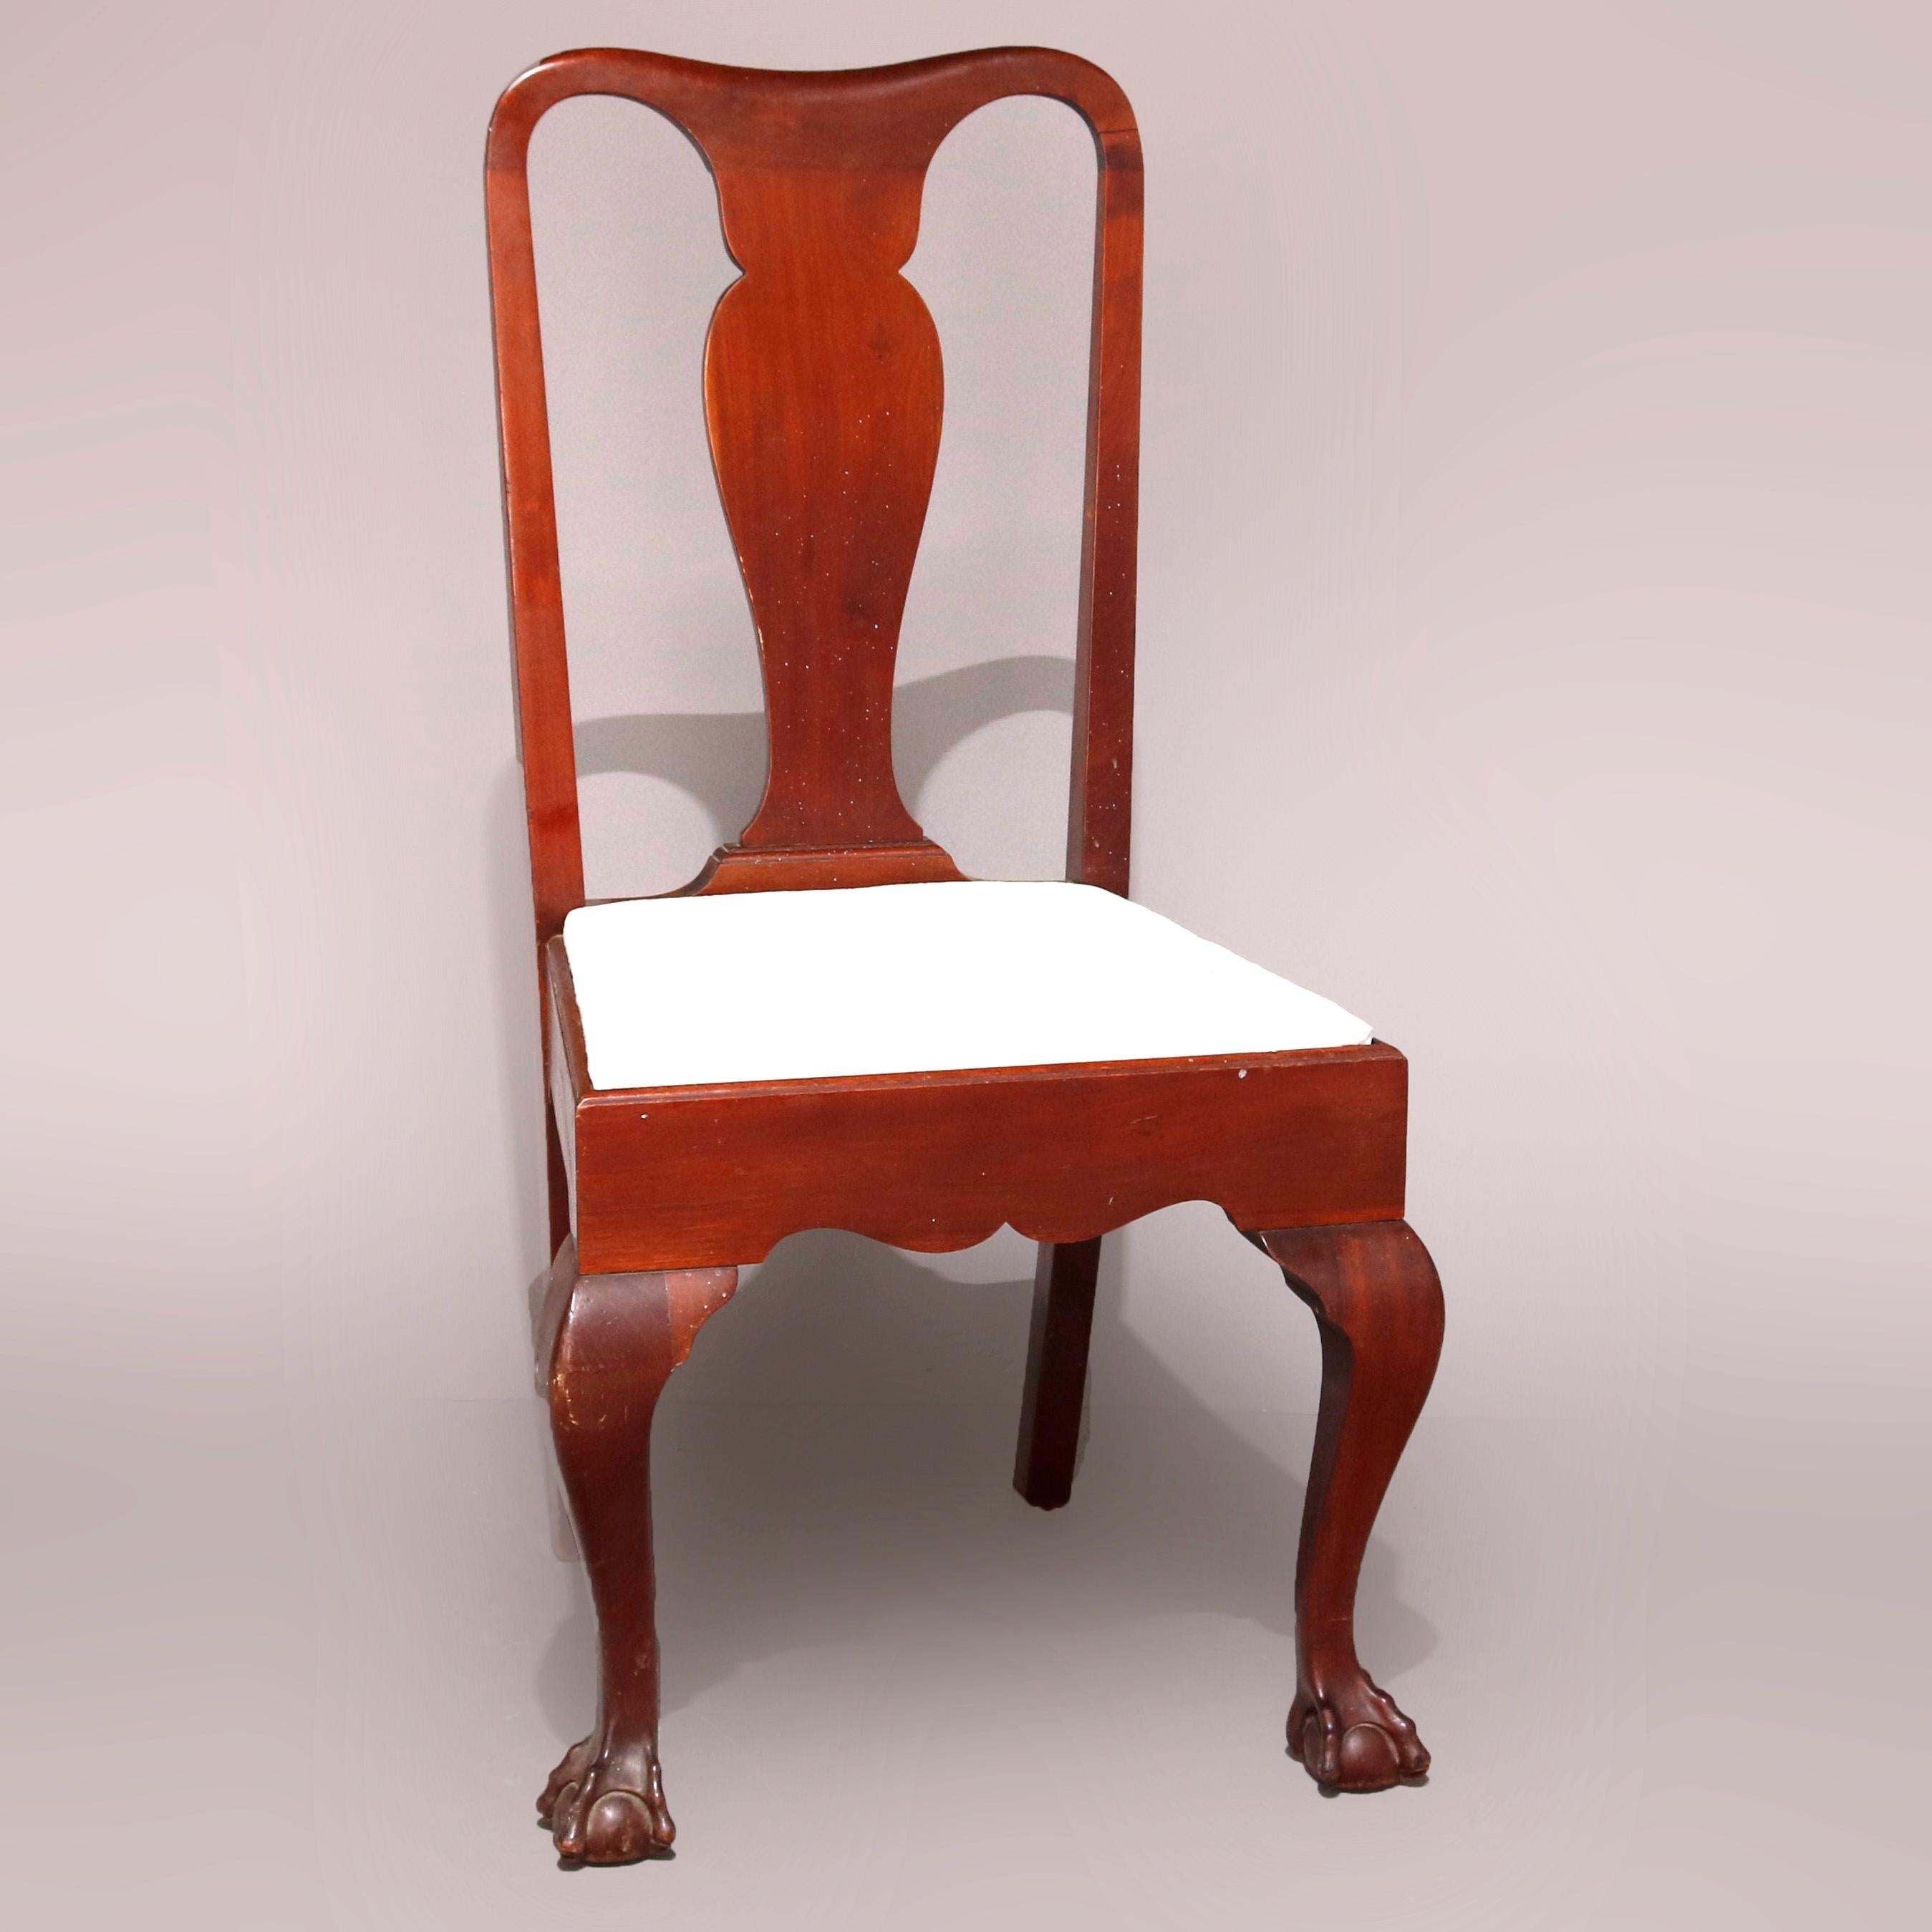 Carved Ten Antique American Empire Flame Mahogany Dining Chairs, circa 1900